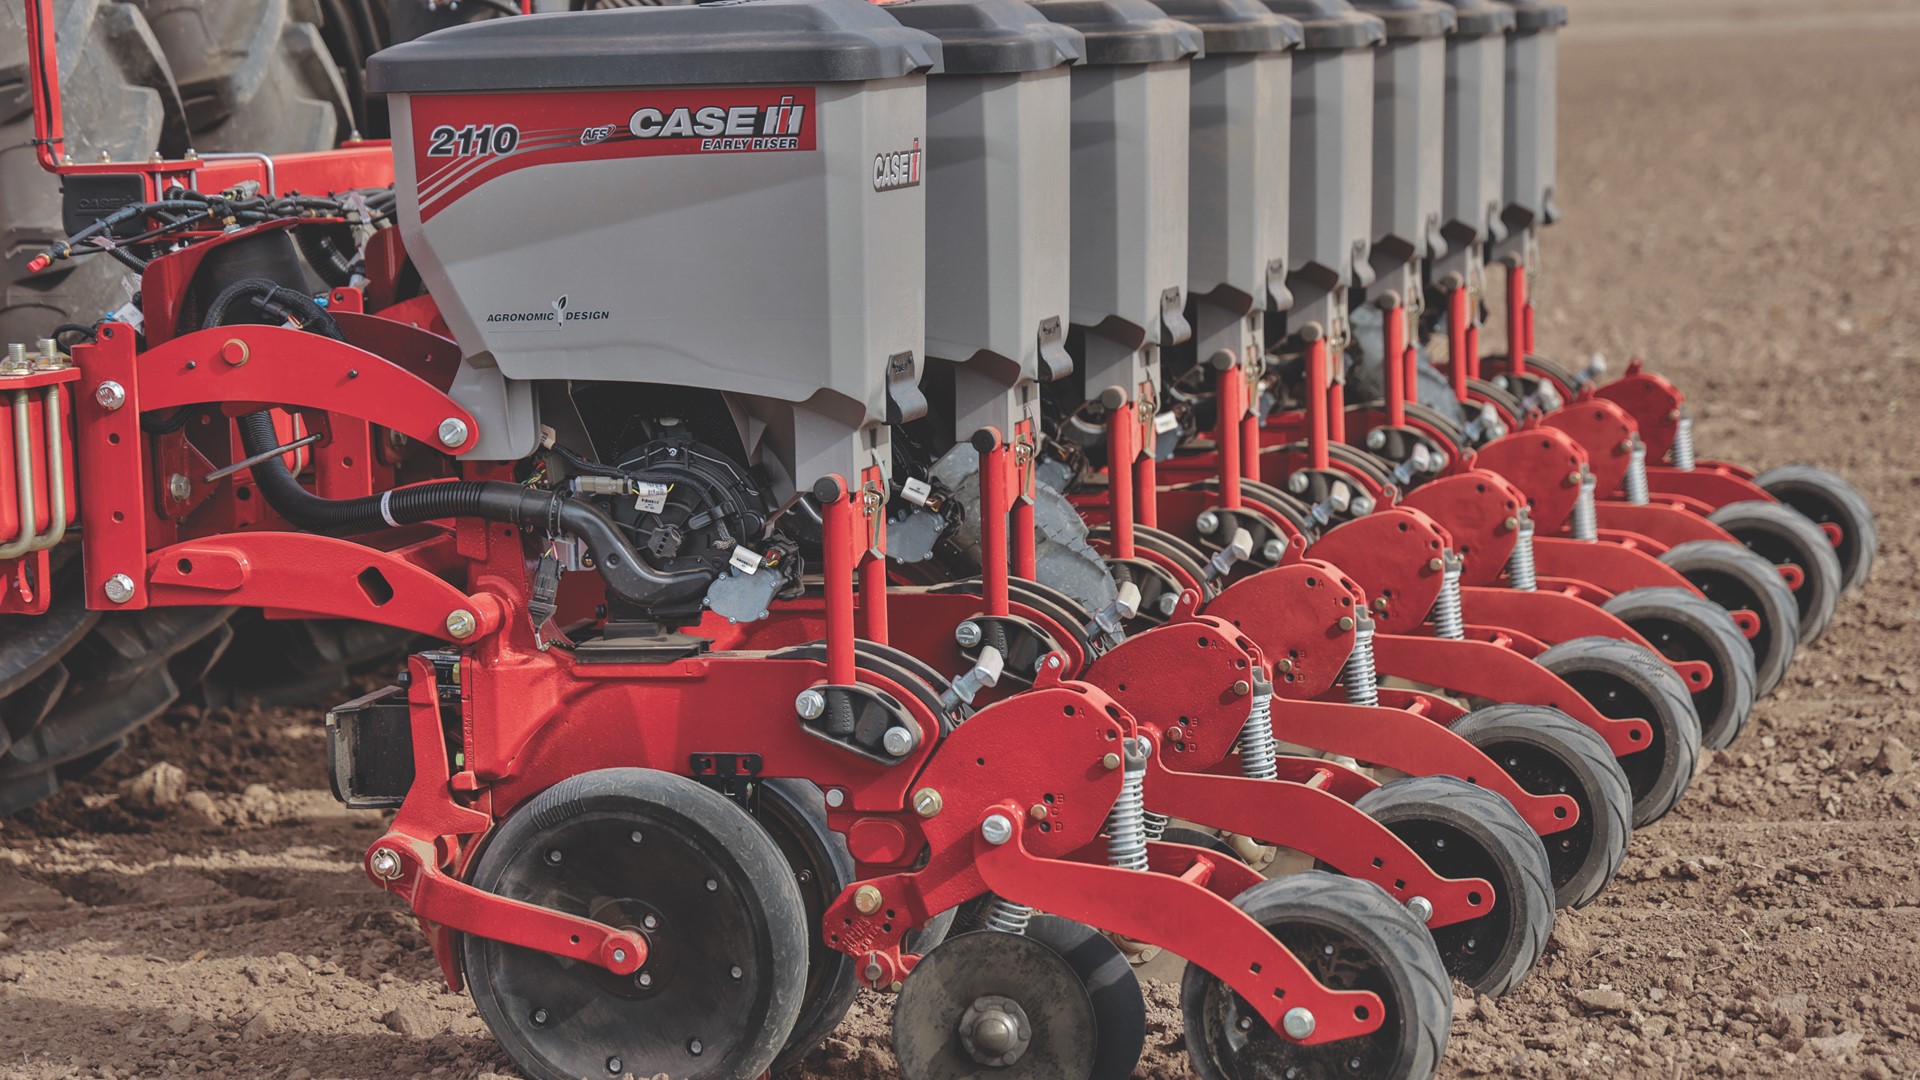 The 2110 Early Riser Planter has a high-spec design for bedded crops, flood irrigation and more.